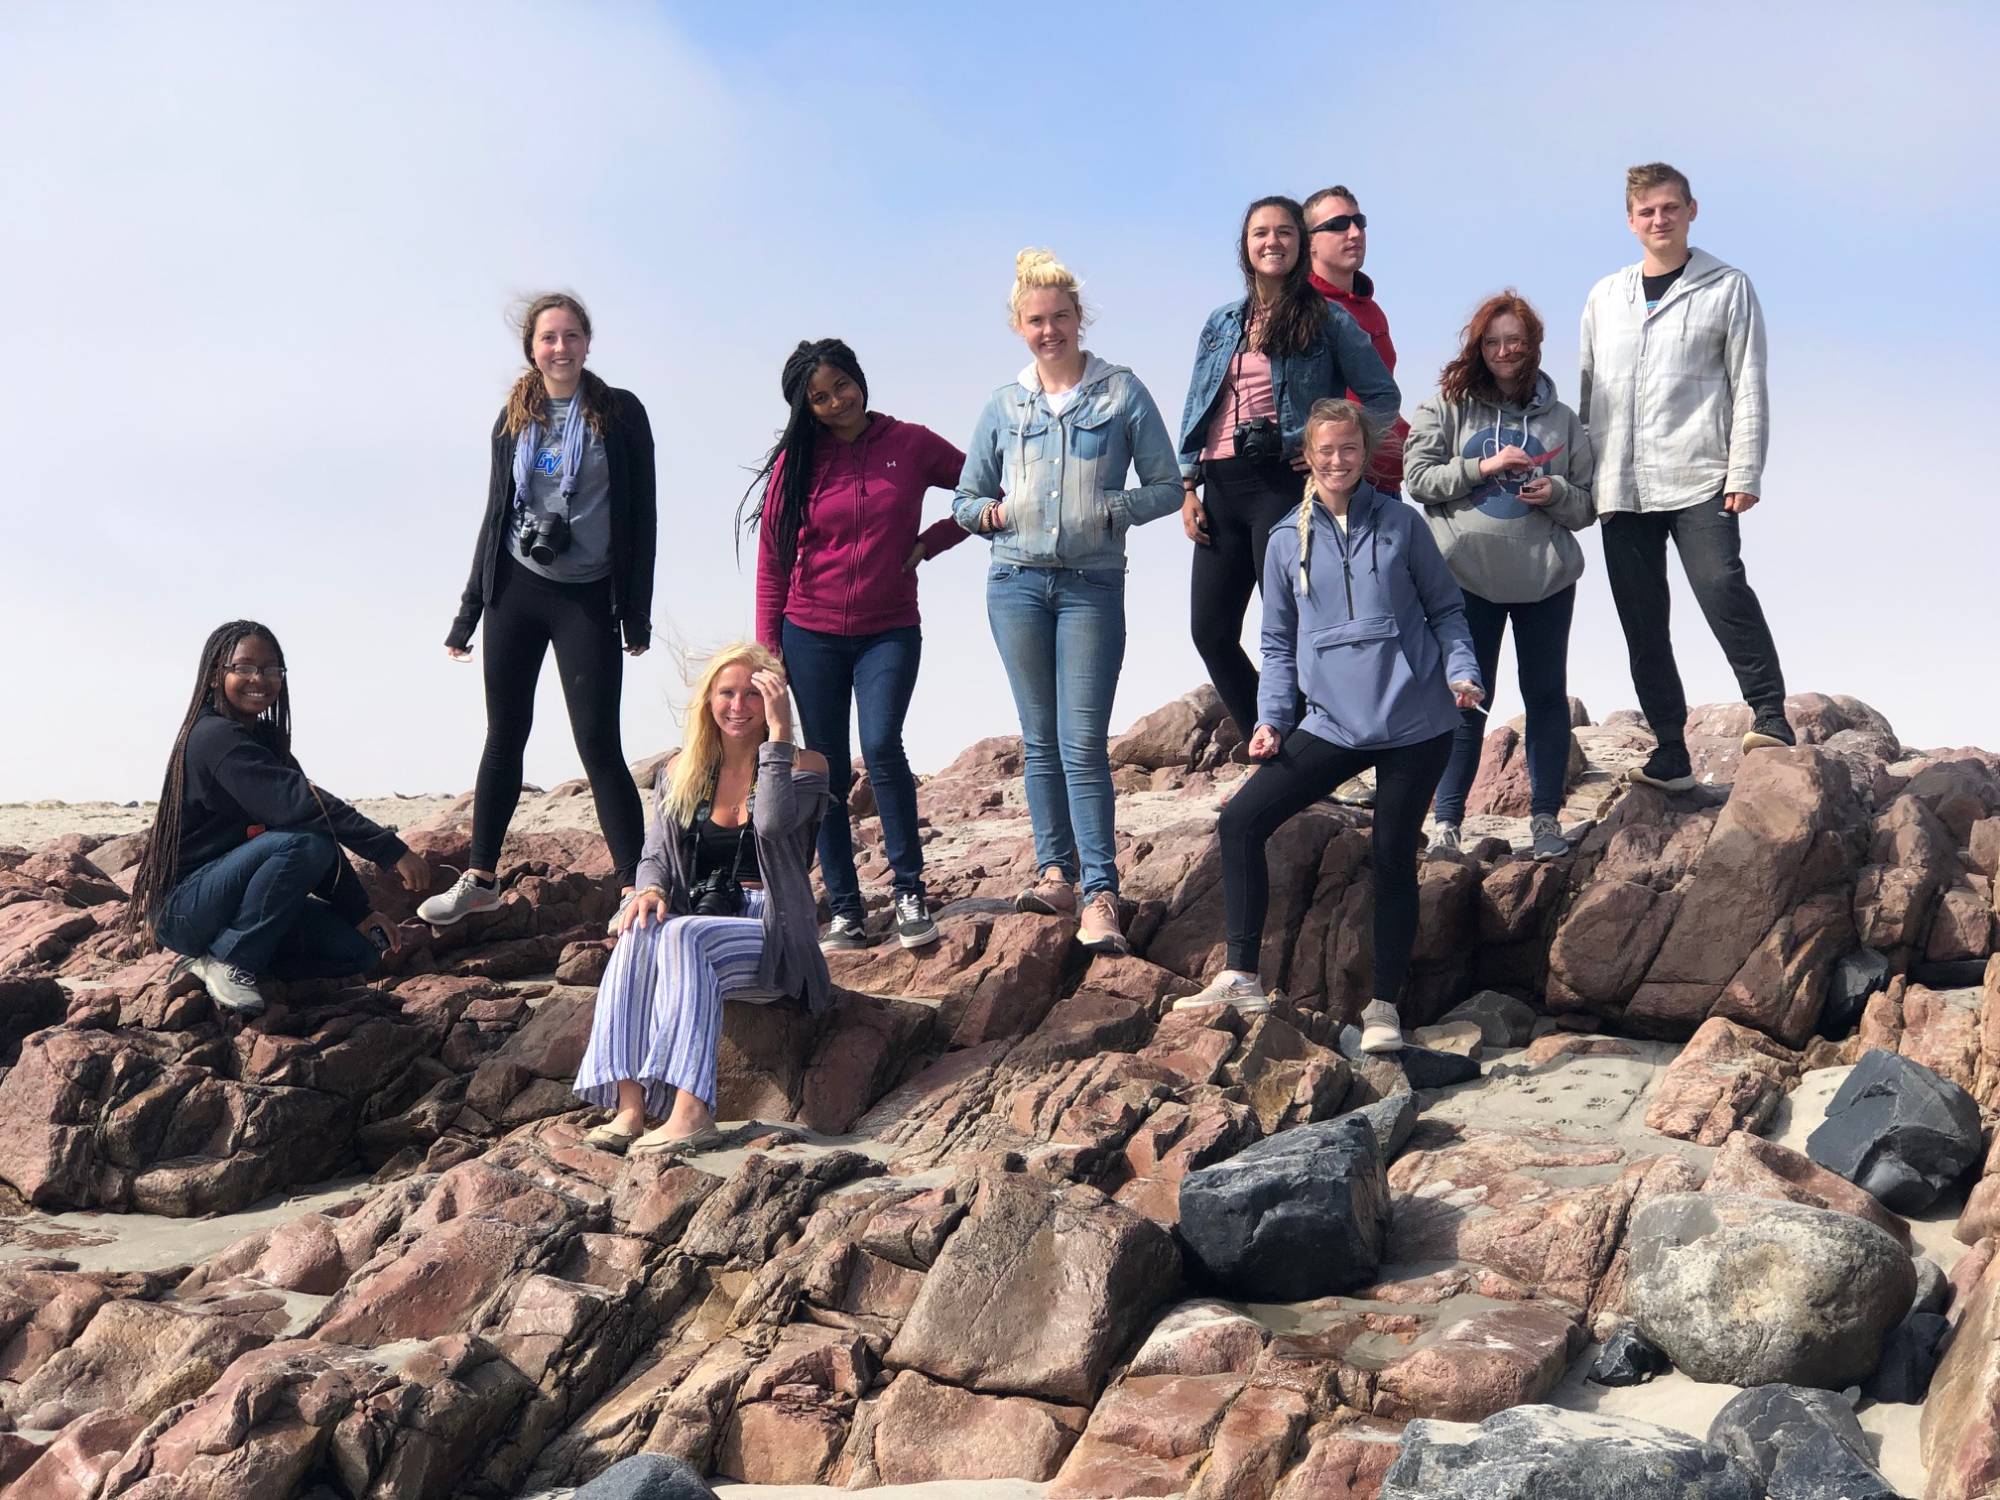 Students posing on rocky ledge in Namibia